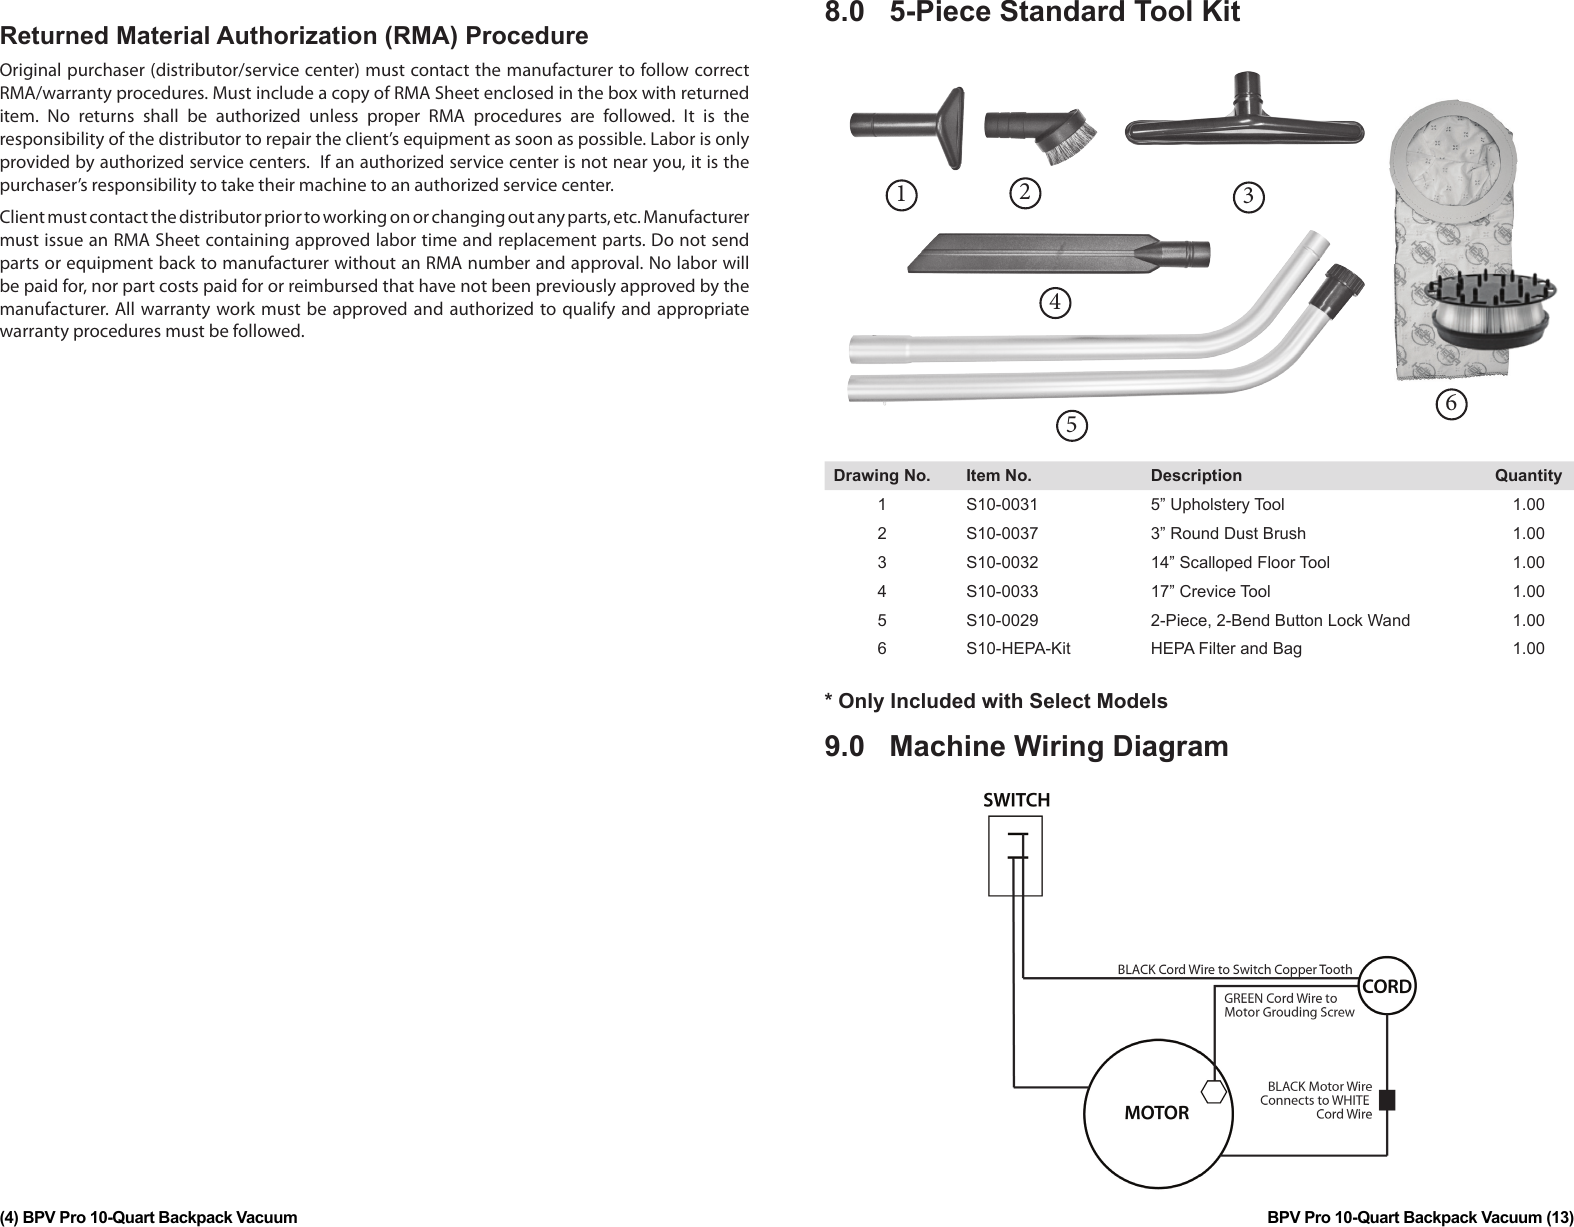 Page 4 of 8 - Minuteman-backpack-series-vacuum-parts-and-operator-manual